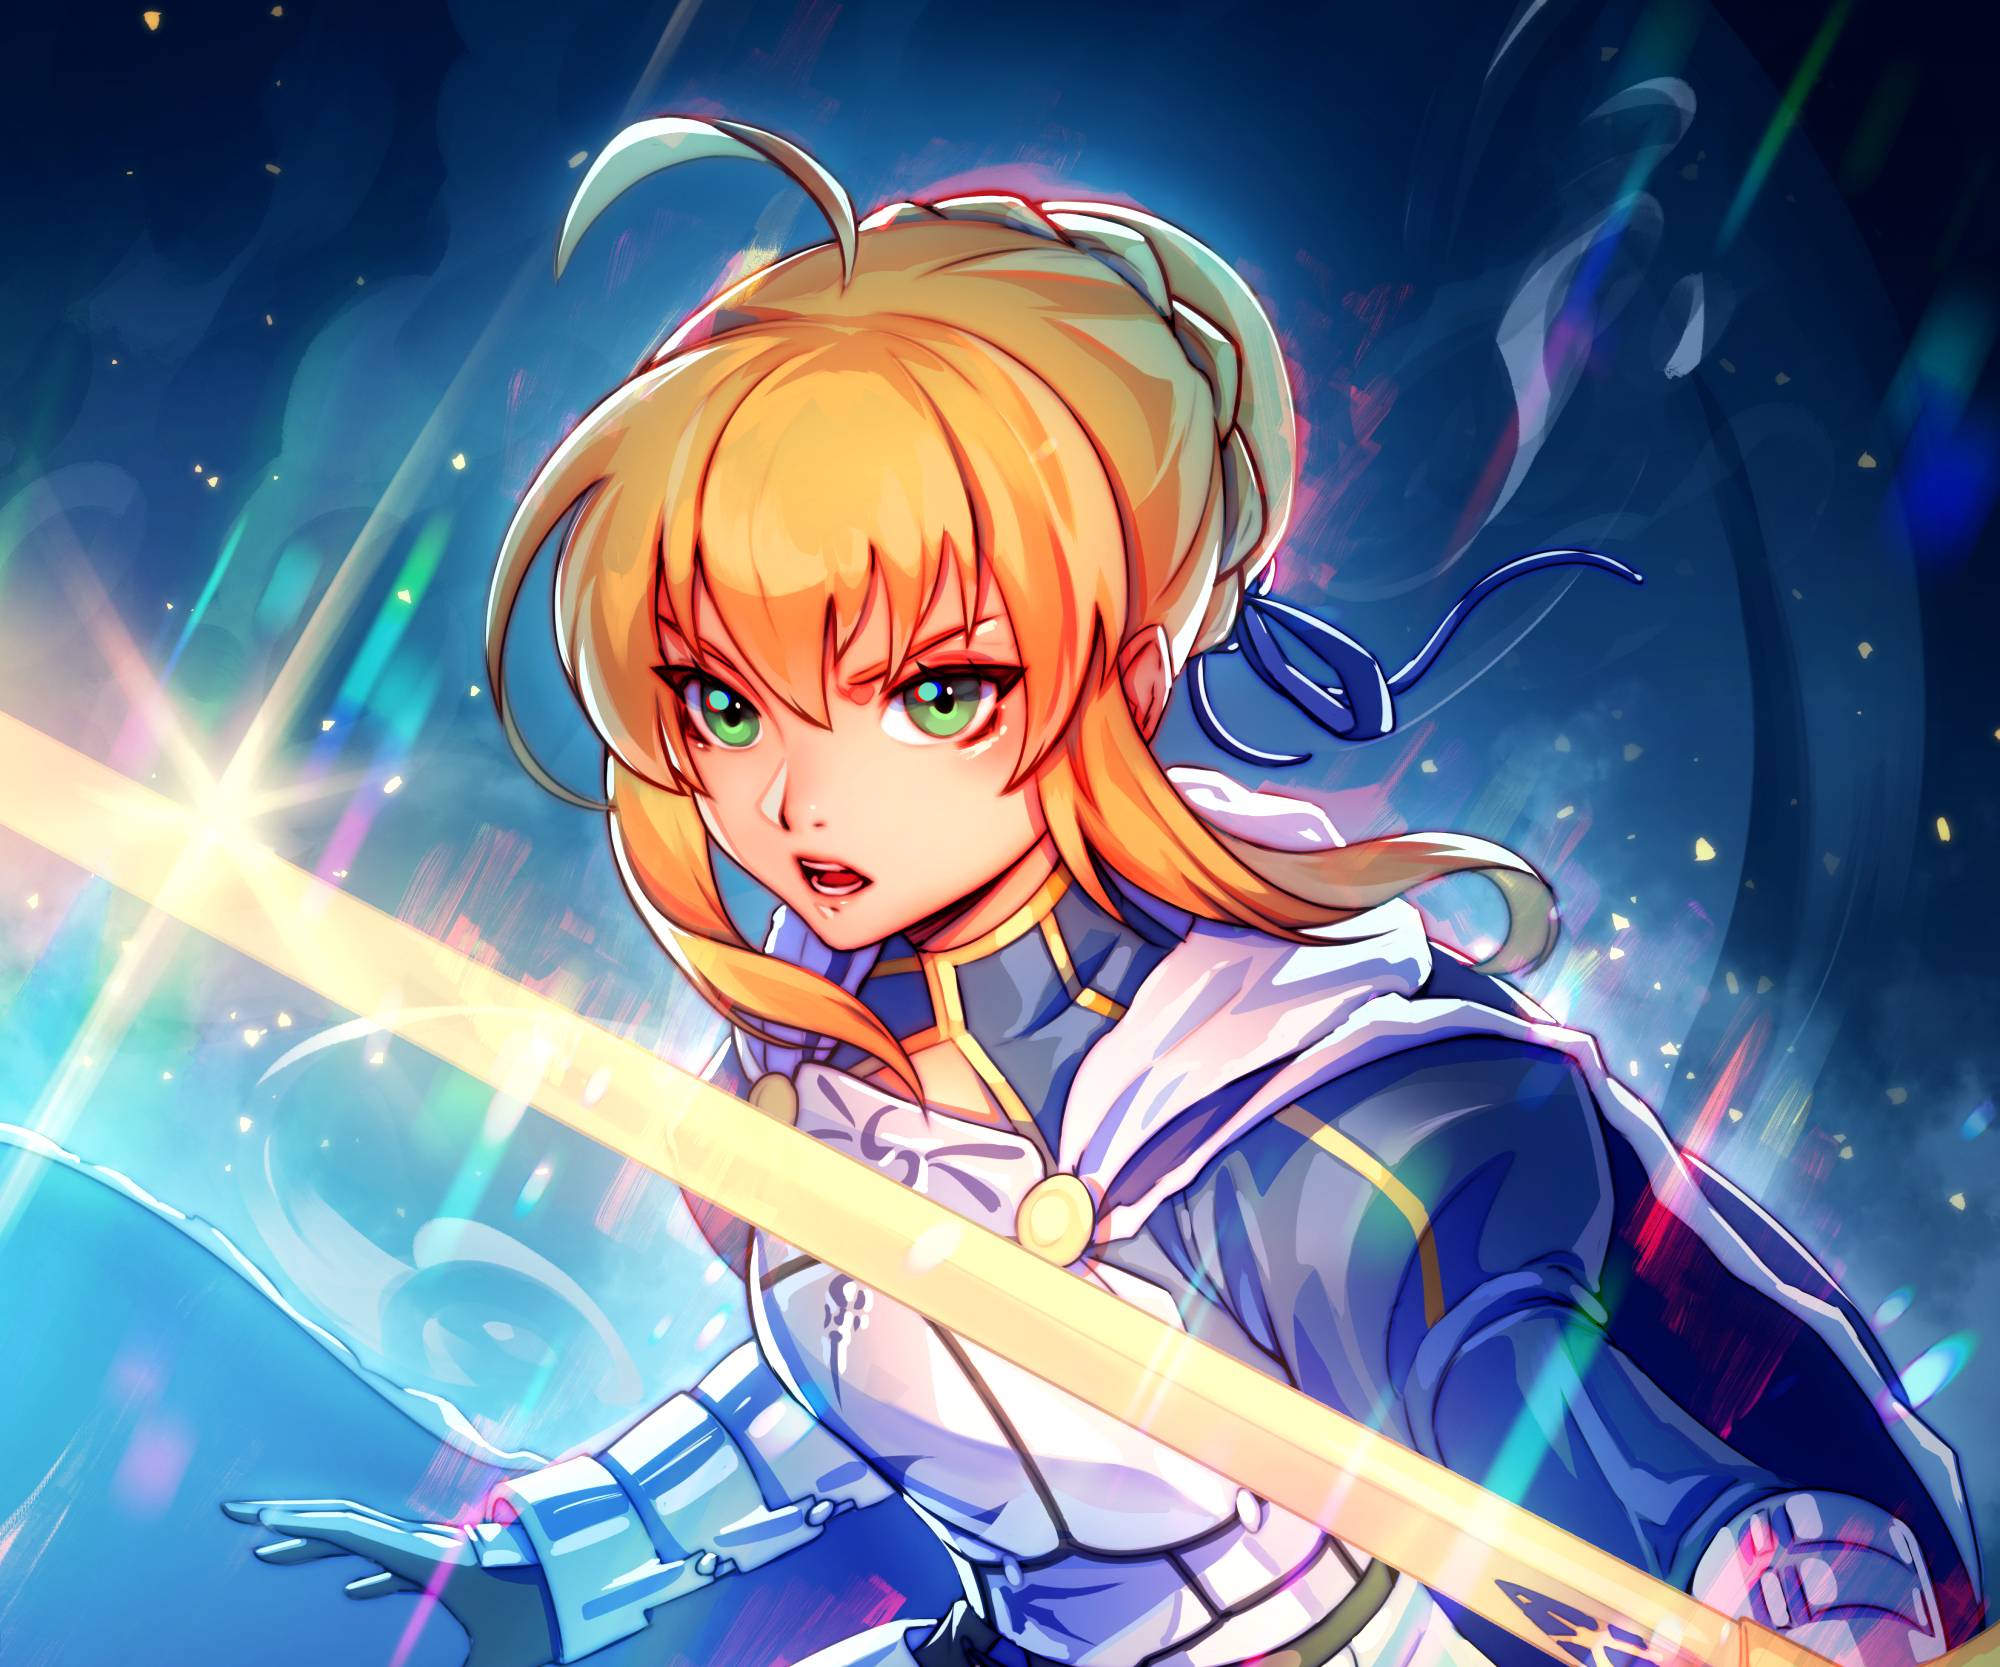 Saber - Fate Series by alinalal